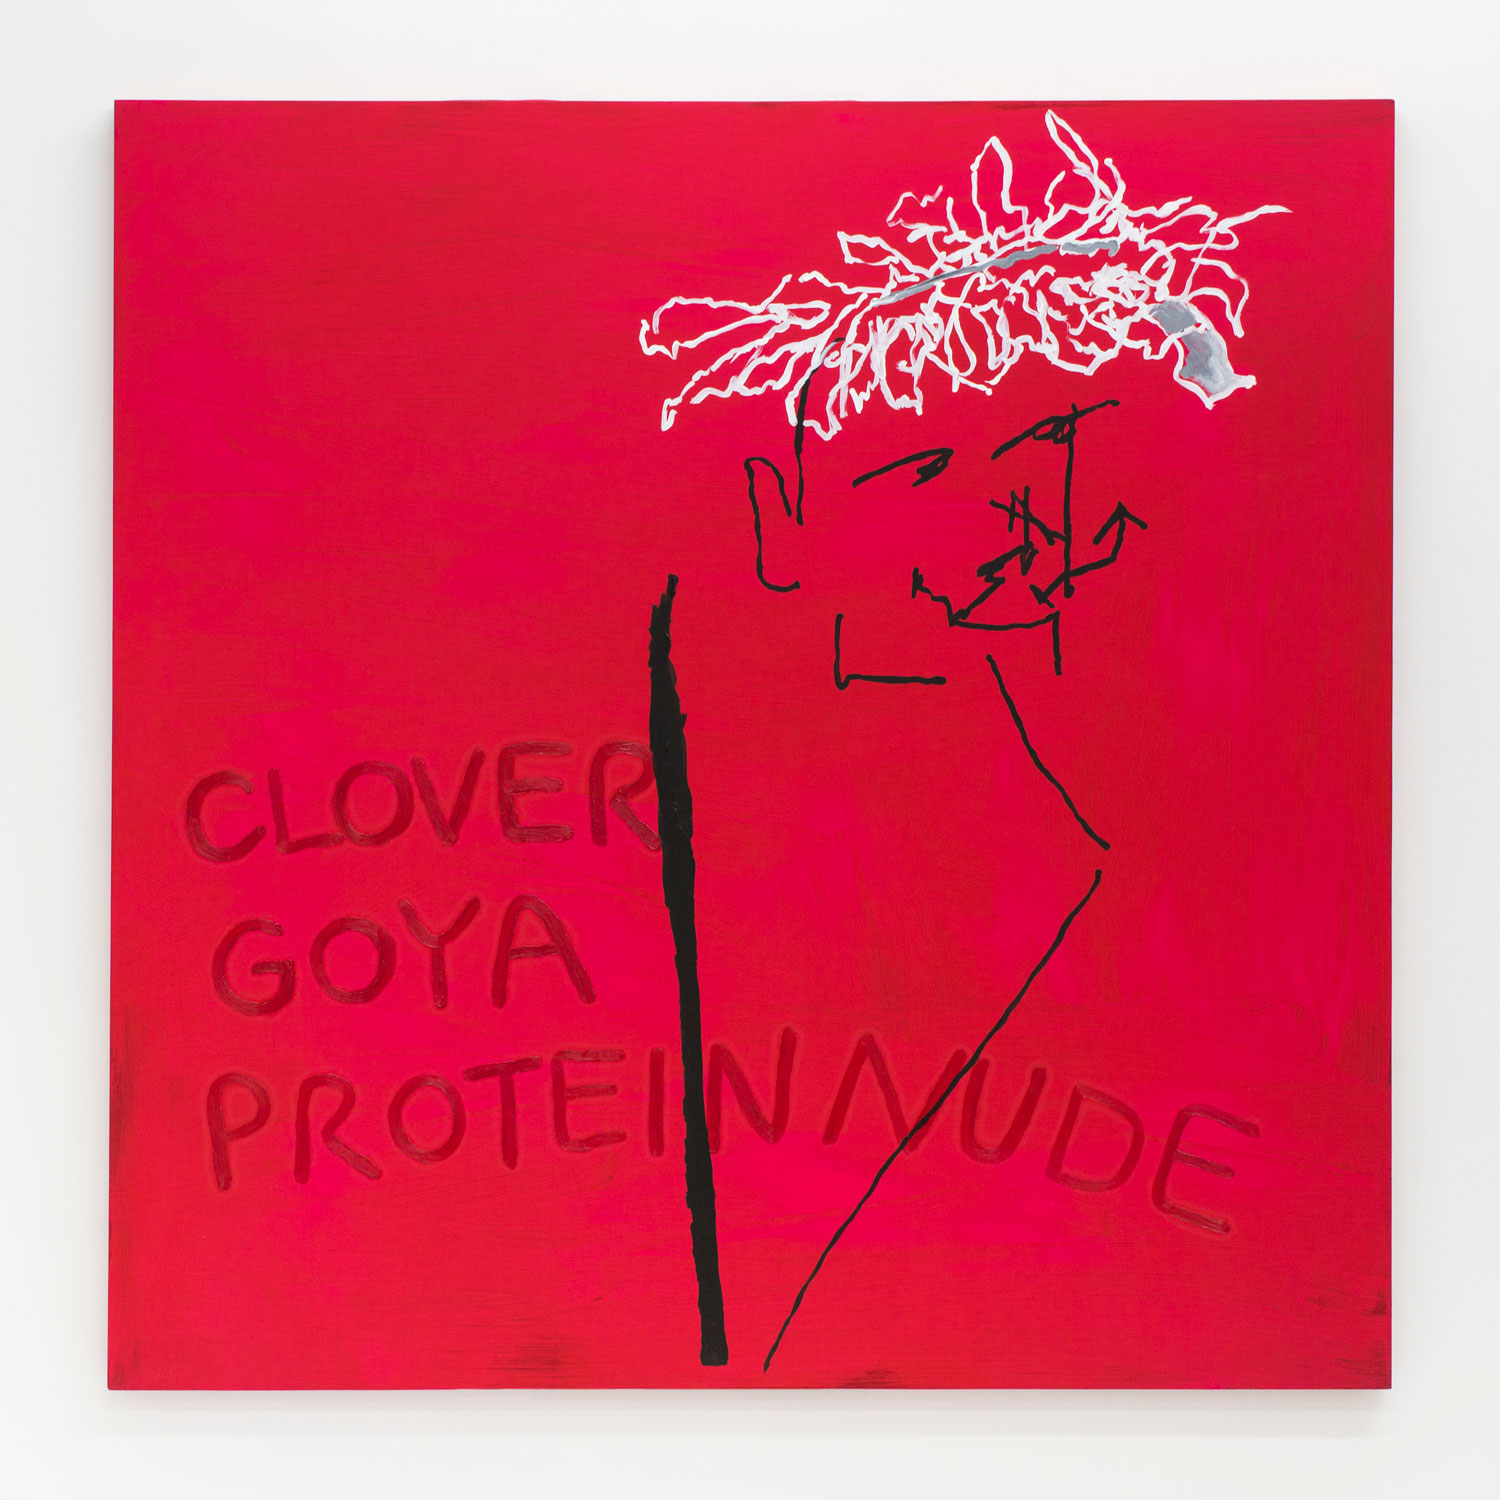  Laura Hunt,  Clover, Goya, Protein, Nude , 2015, acrylic, fabric ink, and oil on metallic Spandex, 48 x 48 inches. 